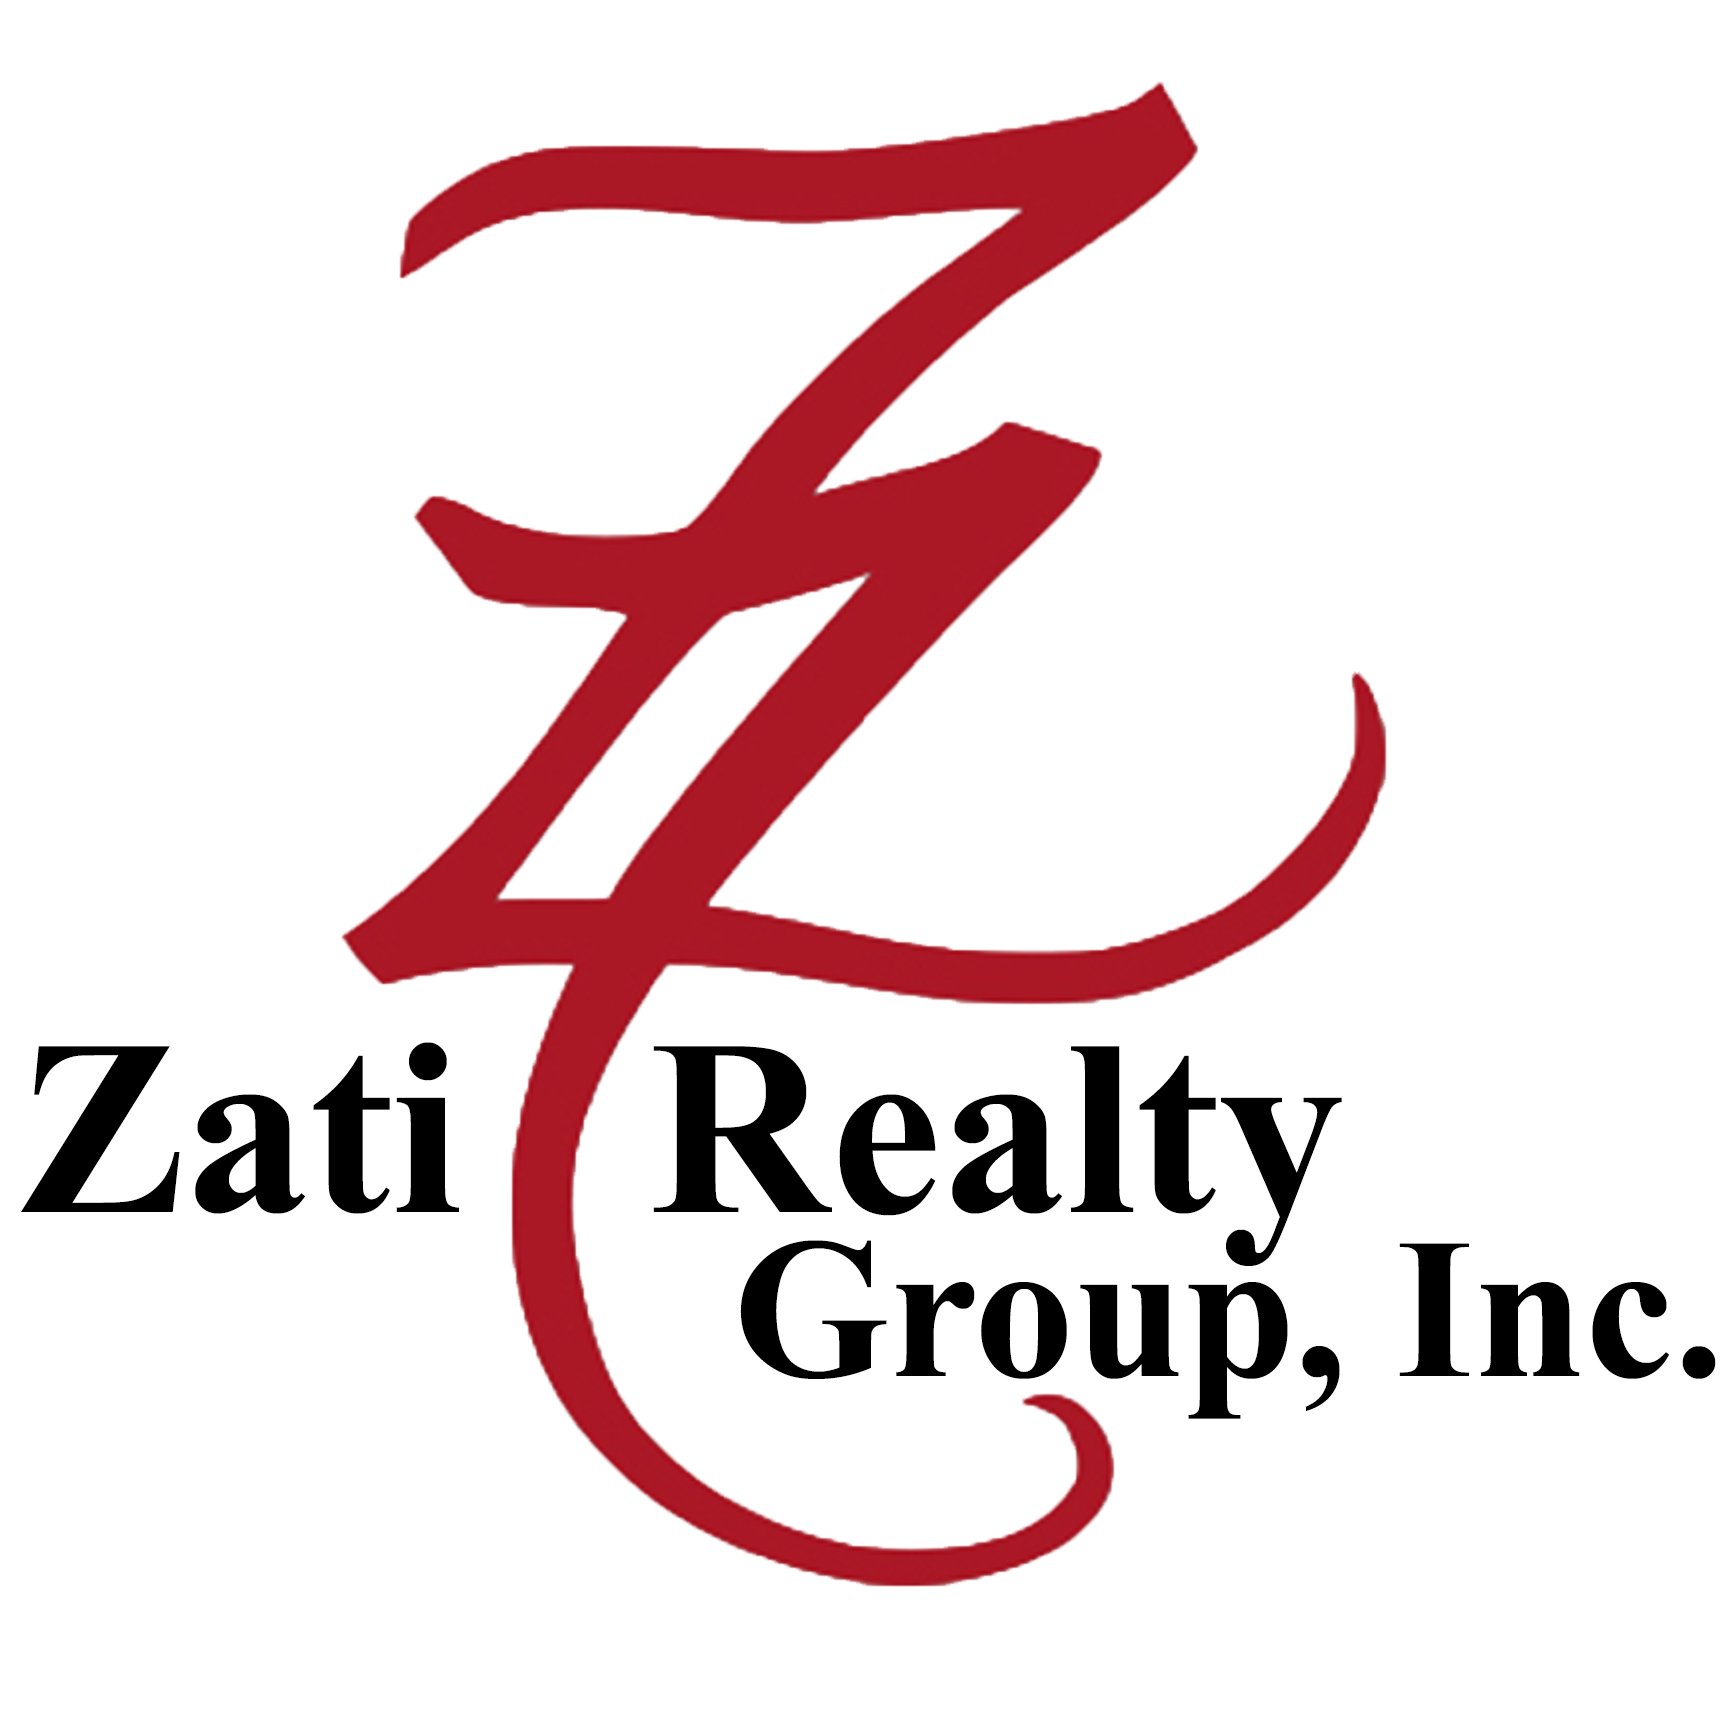 Real Estate Firm in Washington State, specializing in Commercial | Residential | Industrial - Sales, Leasing, Management & Development.